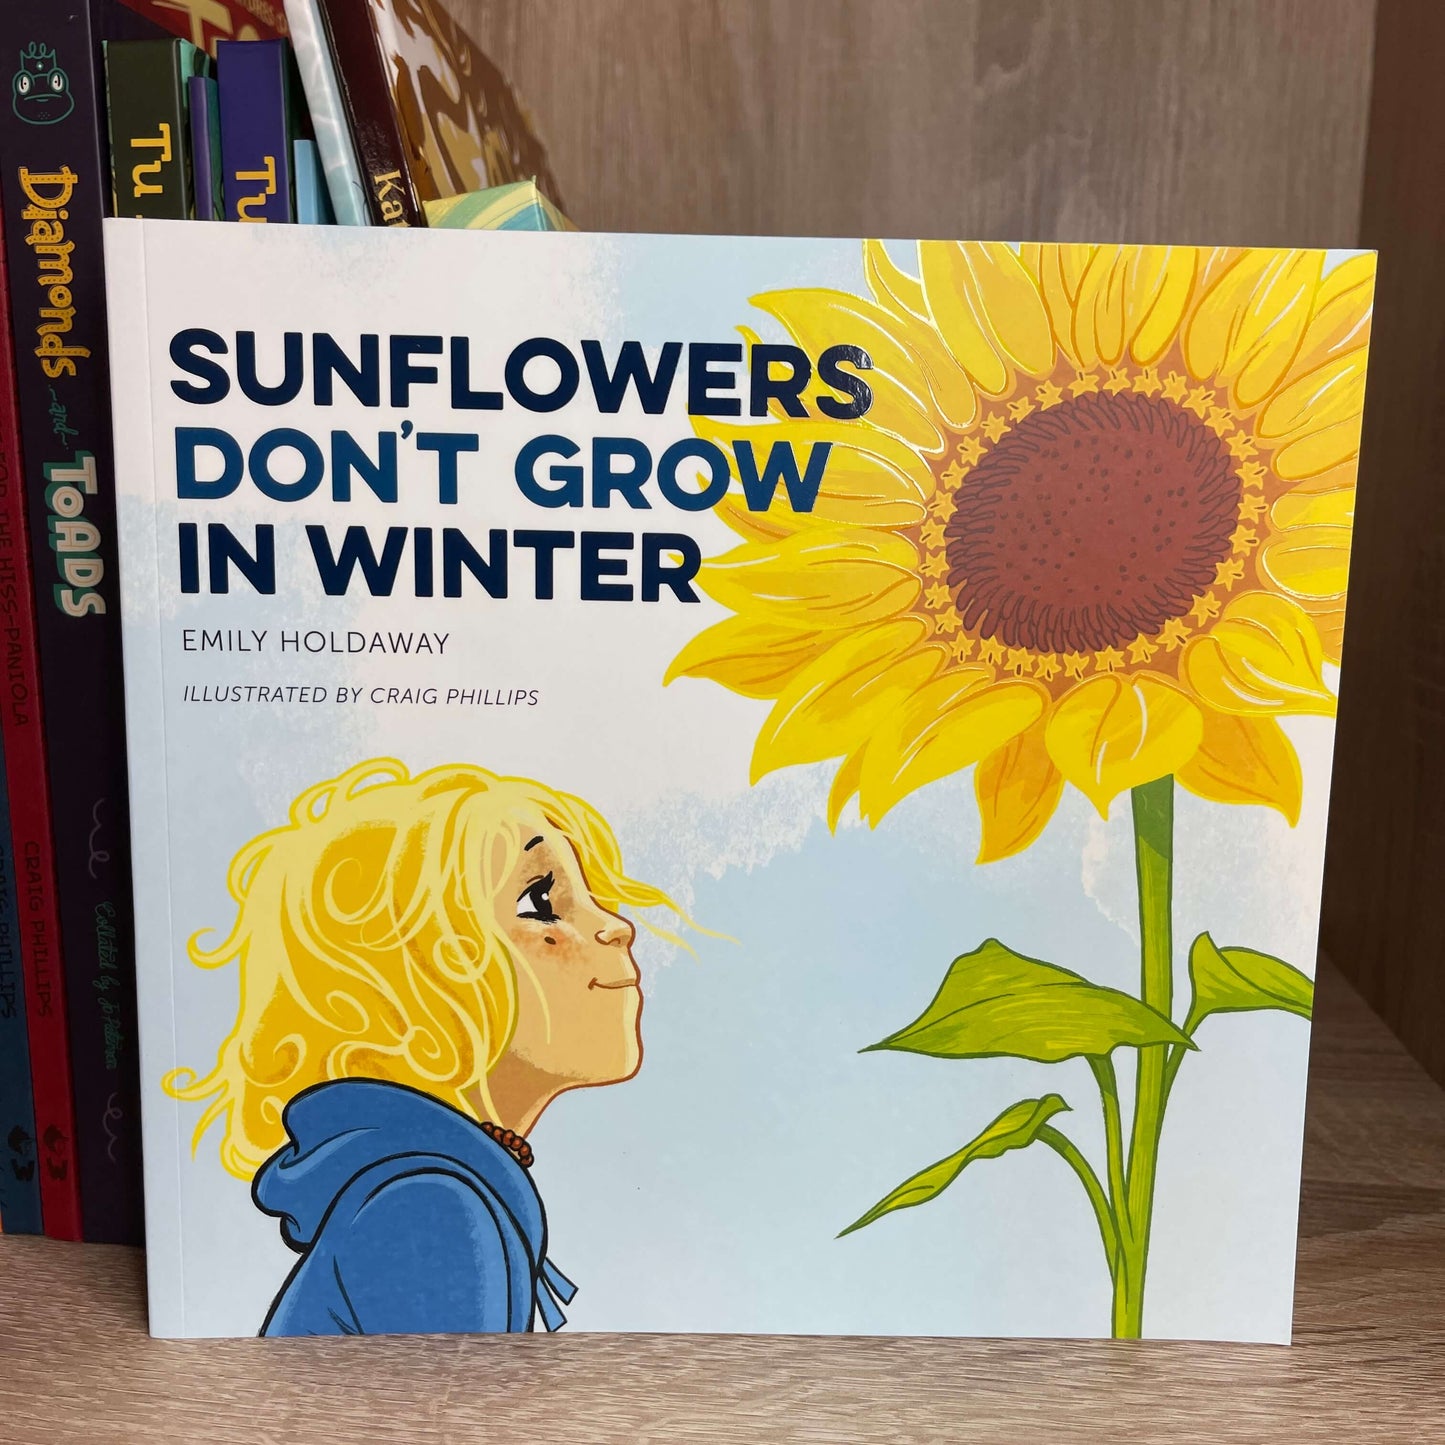 Childrens book Sunflowers Don't Grow in Winter by Emily Holdaway.